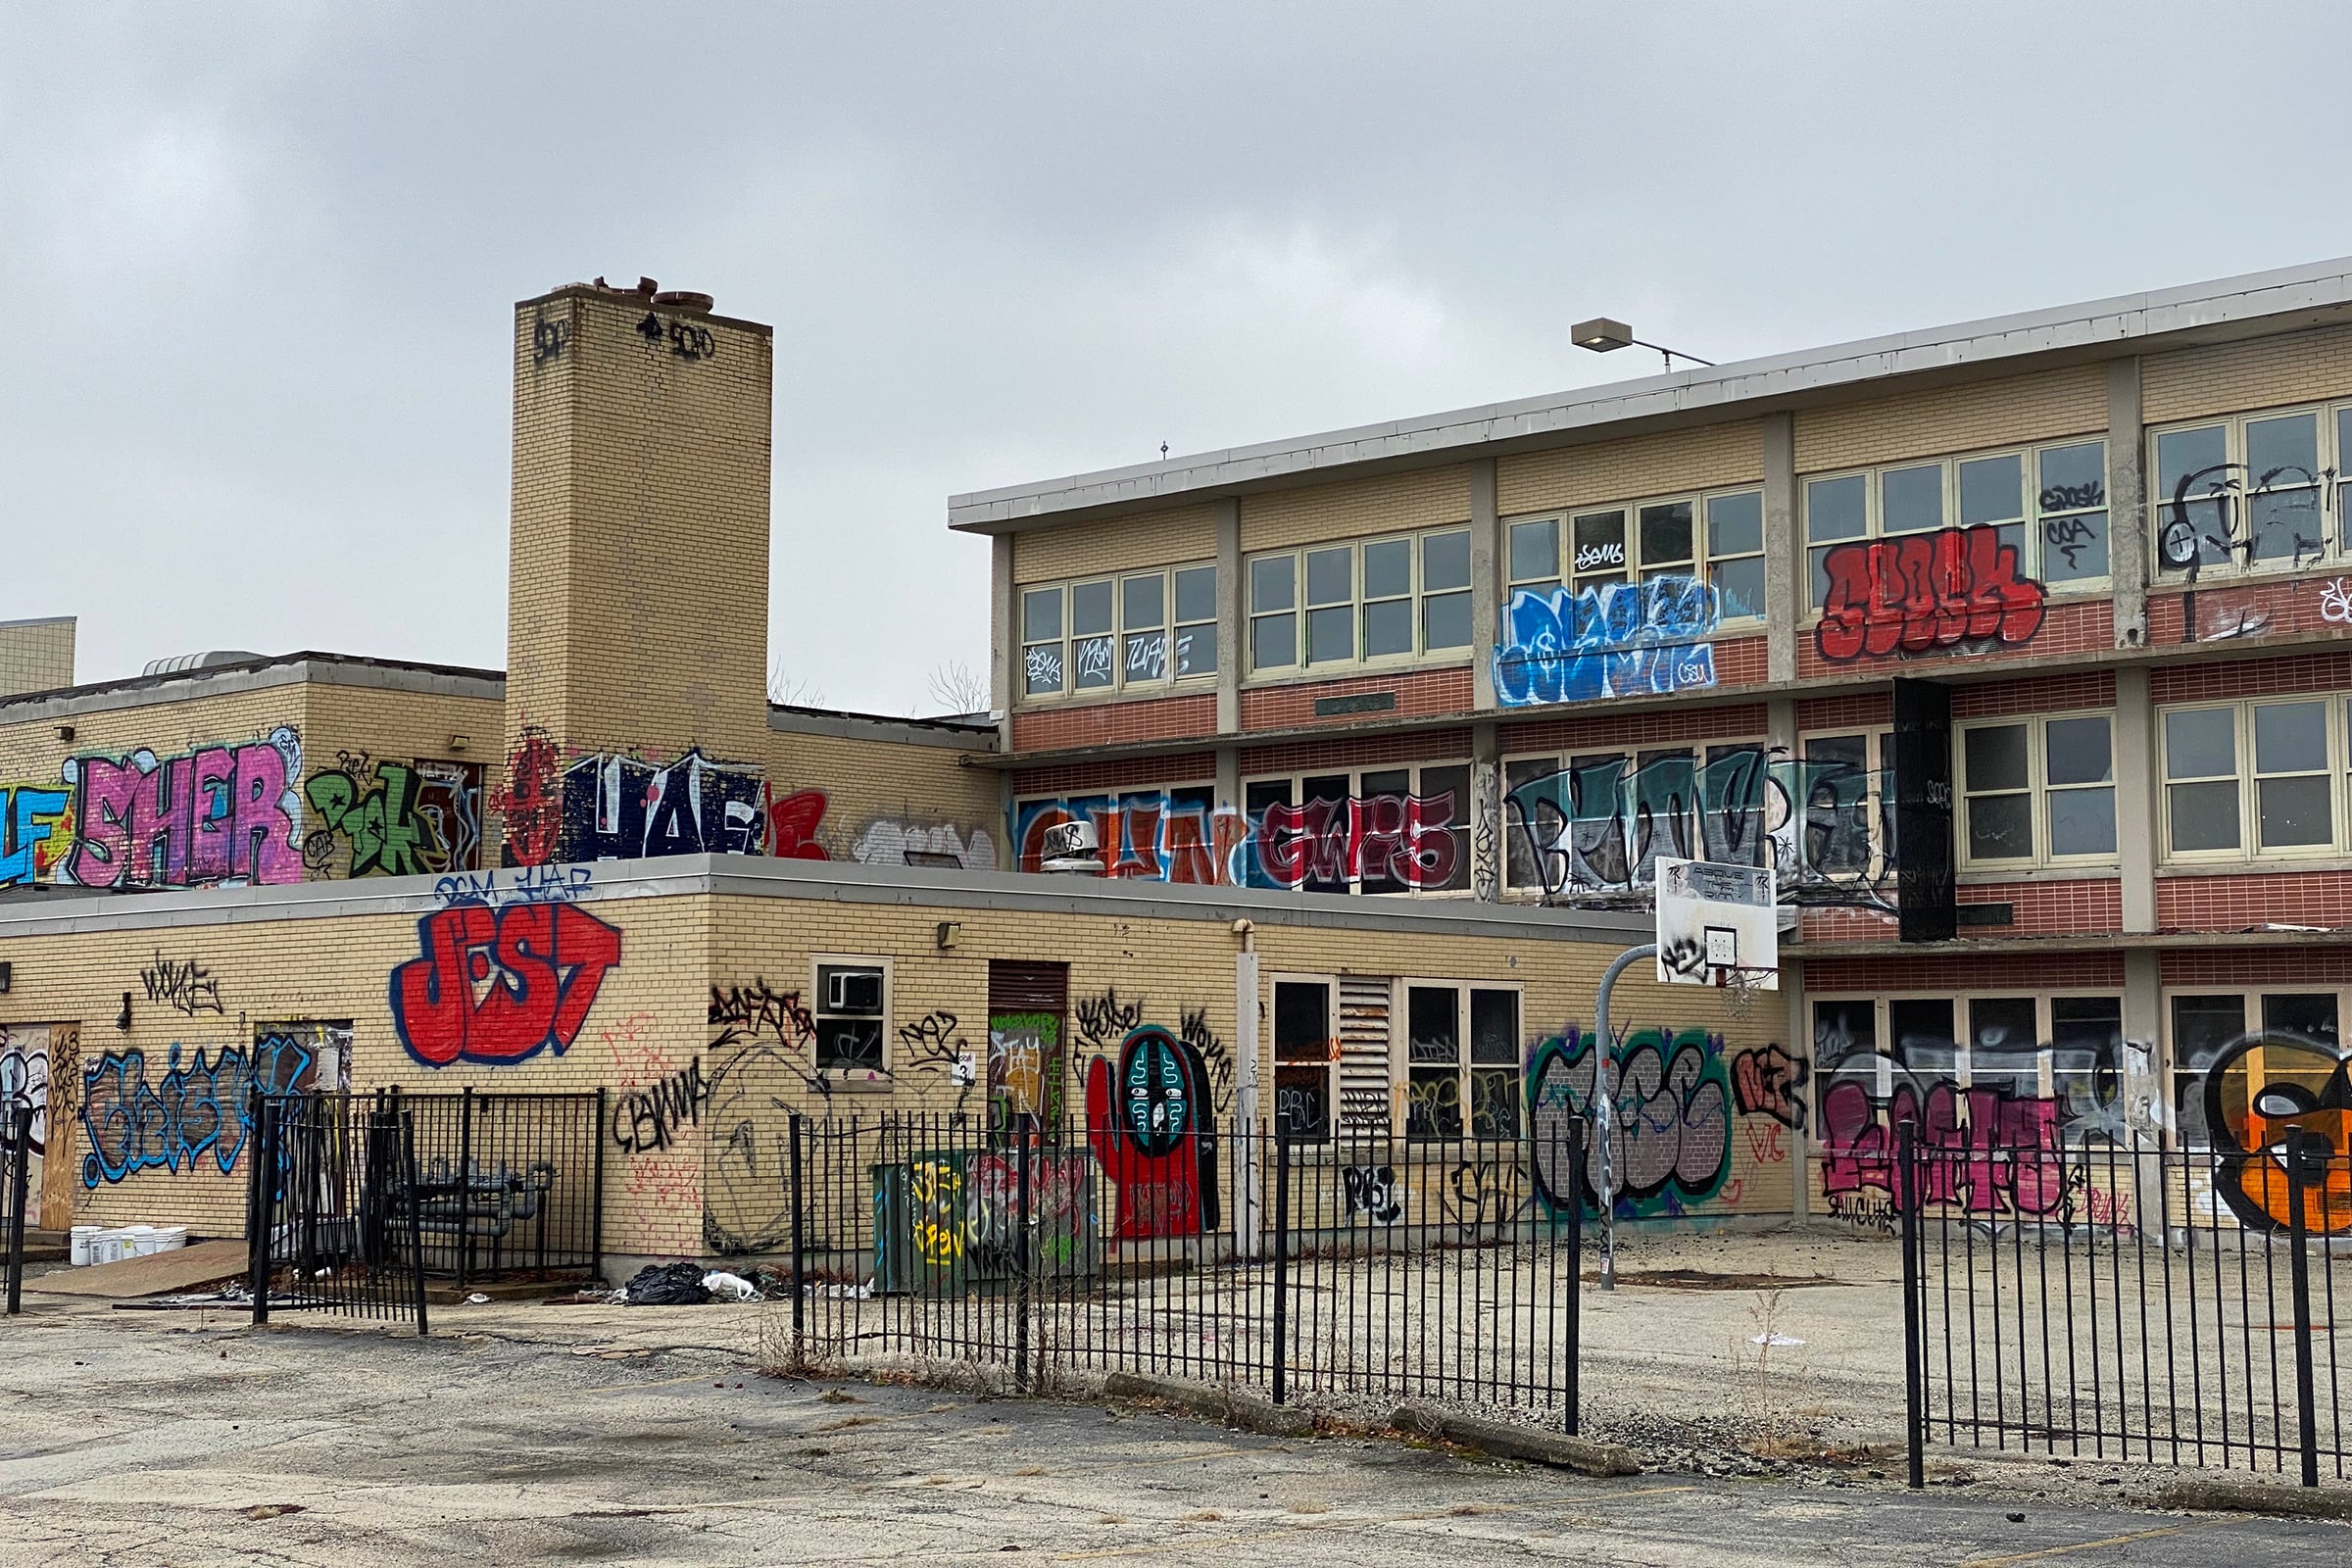 The former Dett Elementary building, 2306 W. Maypole Ave., sits vacant on Chicago’s West Side. Dett’s building closed and the school relocated to Herbert Elementary, 2131 W Monroe St., in 2013 when the Chicago Board of Education shuttered 50 schools.